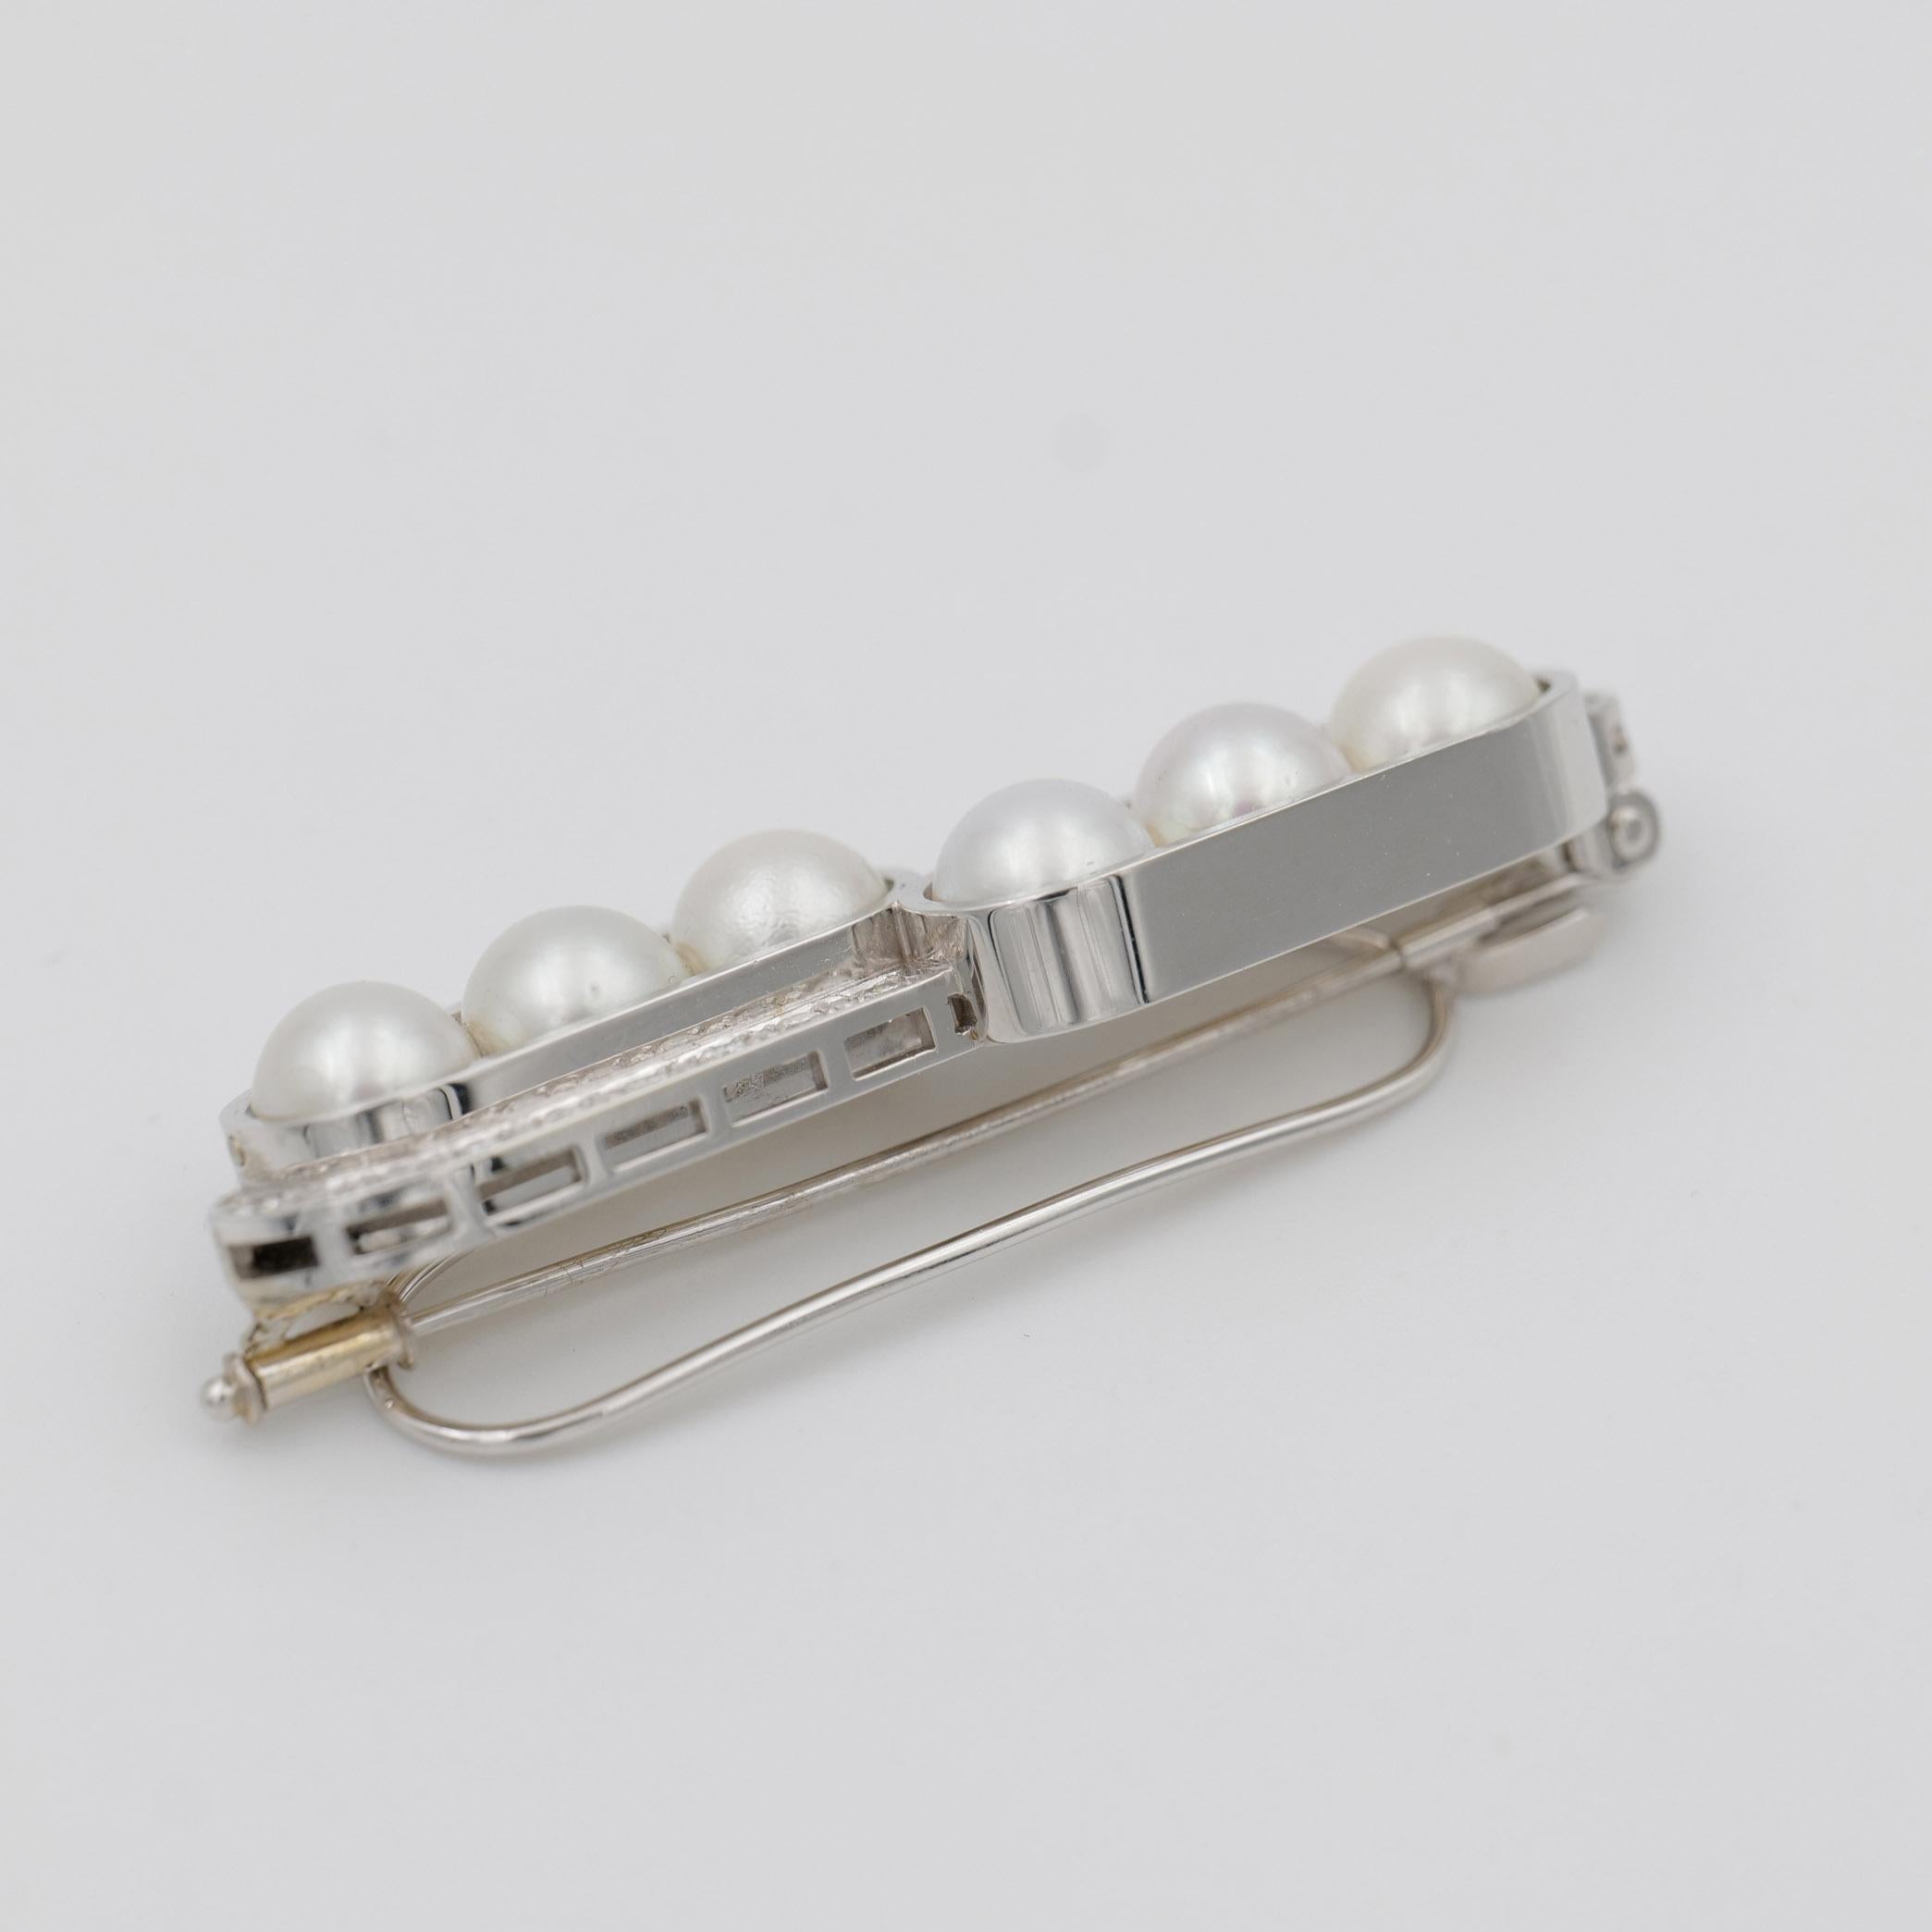  Brooch set with 6 South Sea pearls, set in 750/- white gold, brilliant-cut diamonds, approx. 1 ct.

A brooch with a minimalist design that can also be worn as a pendant and which emphasizes the materials pearl, diamond and 18 ct. white gold. white